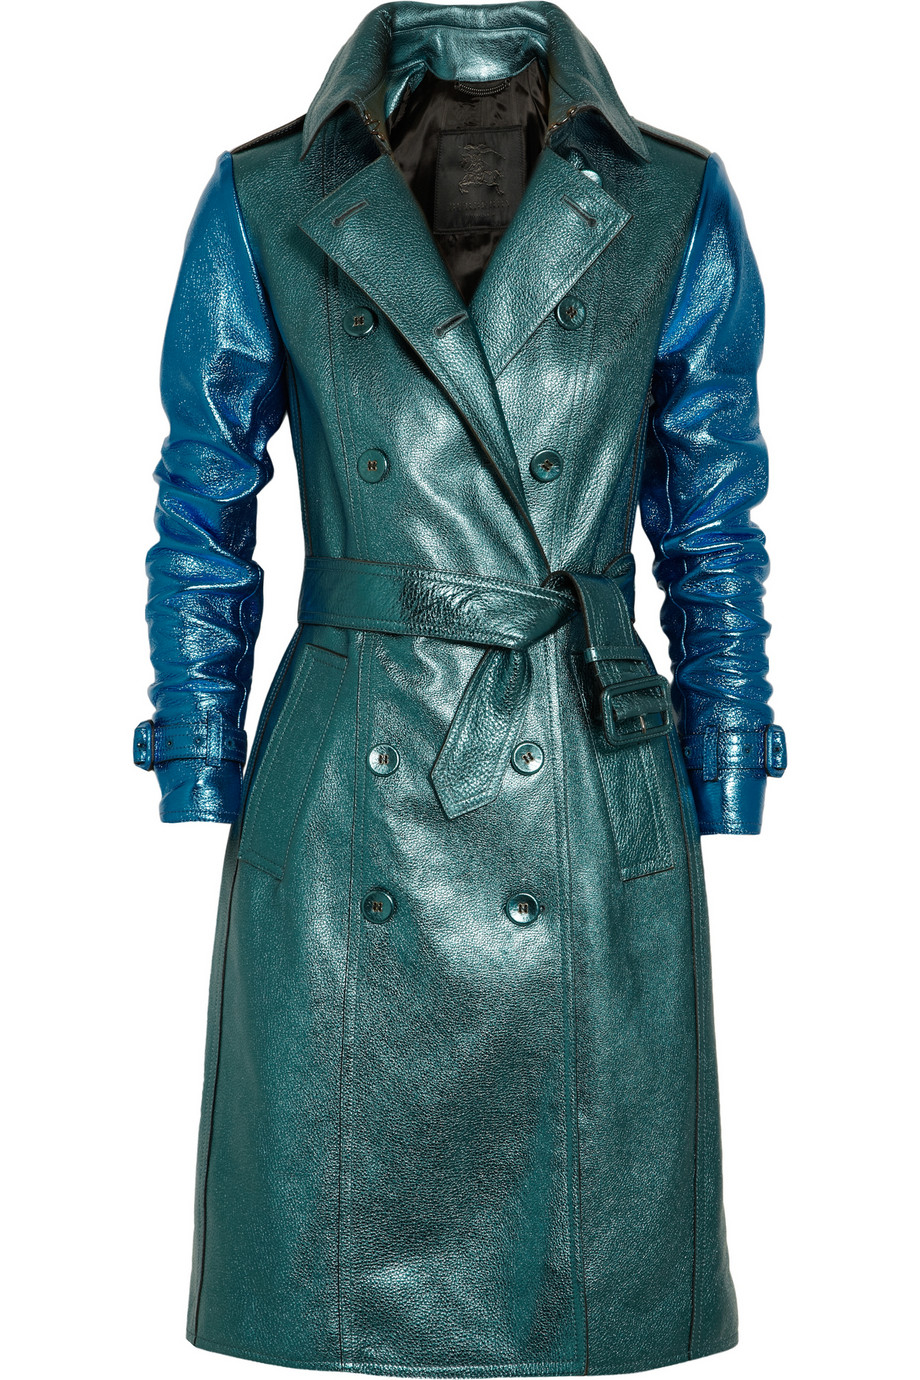 Burberry Prorsum Metallic Texturedleather Trench Coat in Blue (teal) | Lyst